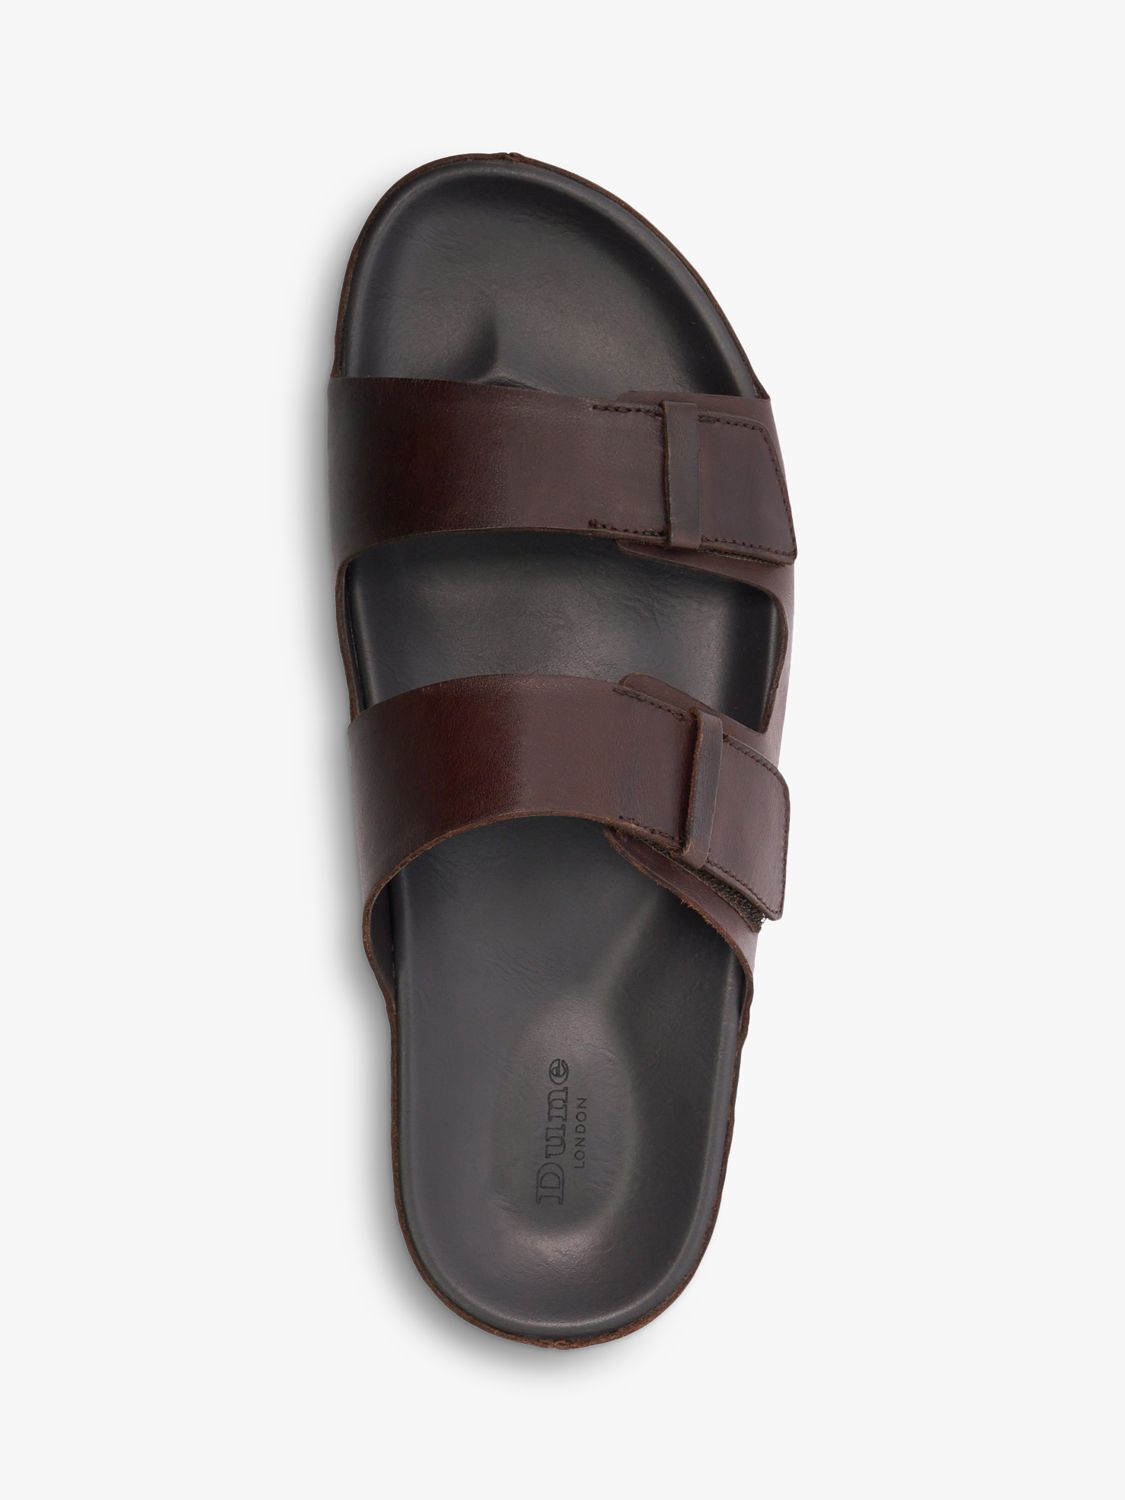 Buy Dune Intells Leather Double Strap Sandals, Brown Online at johnlewis.com